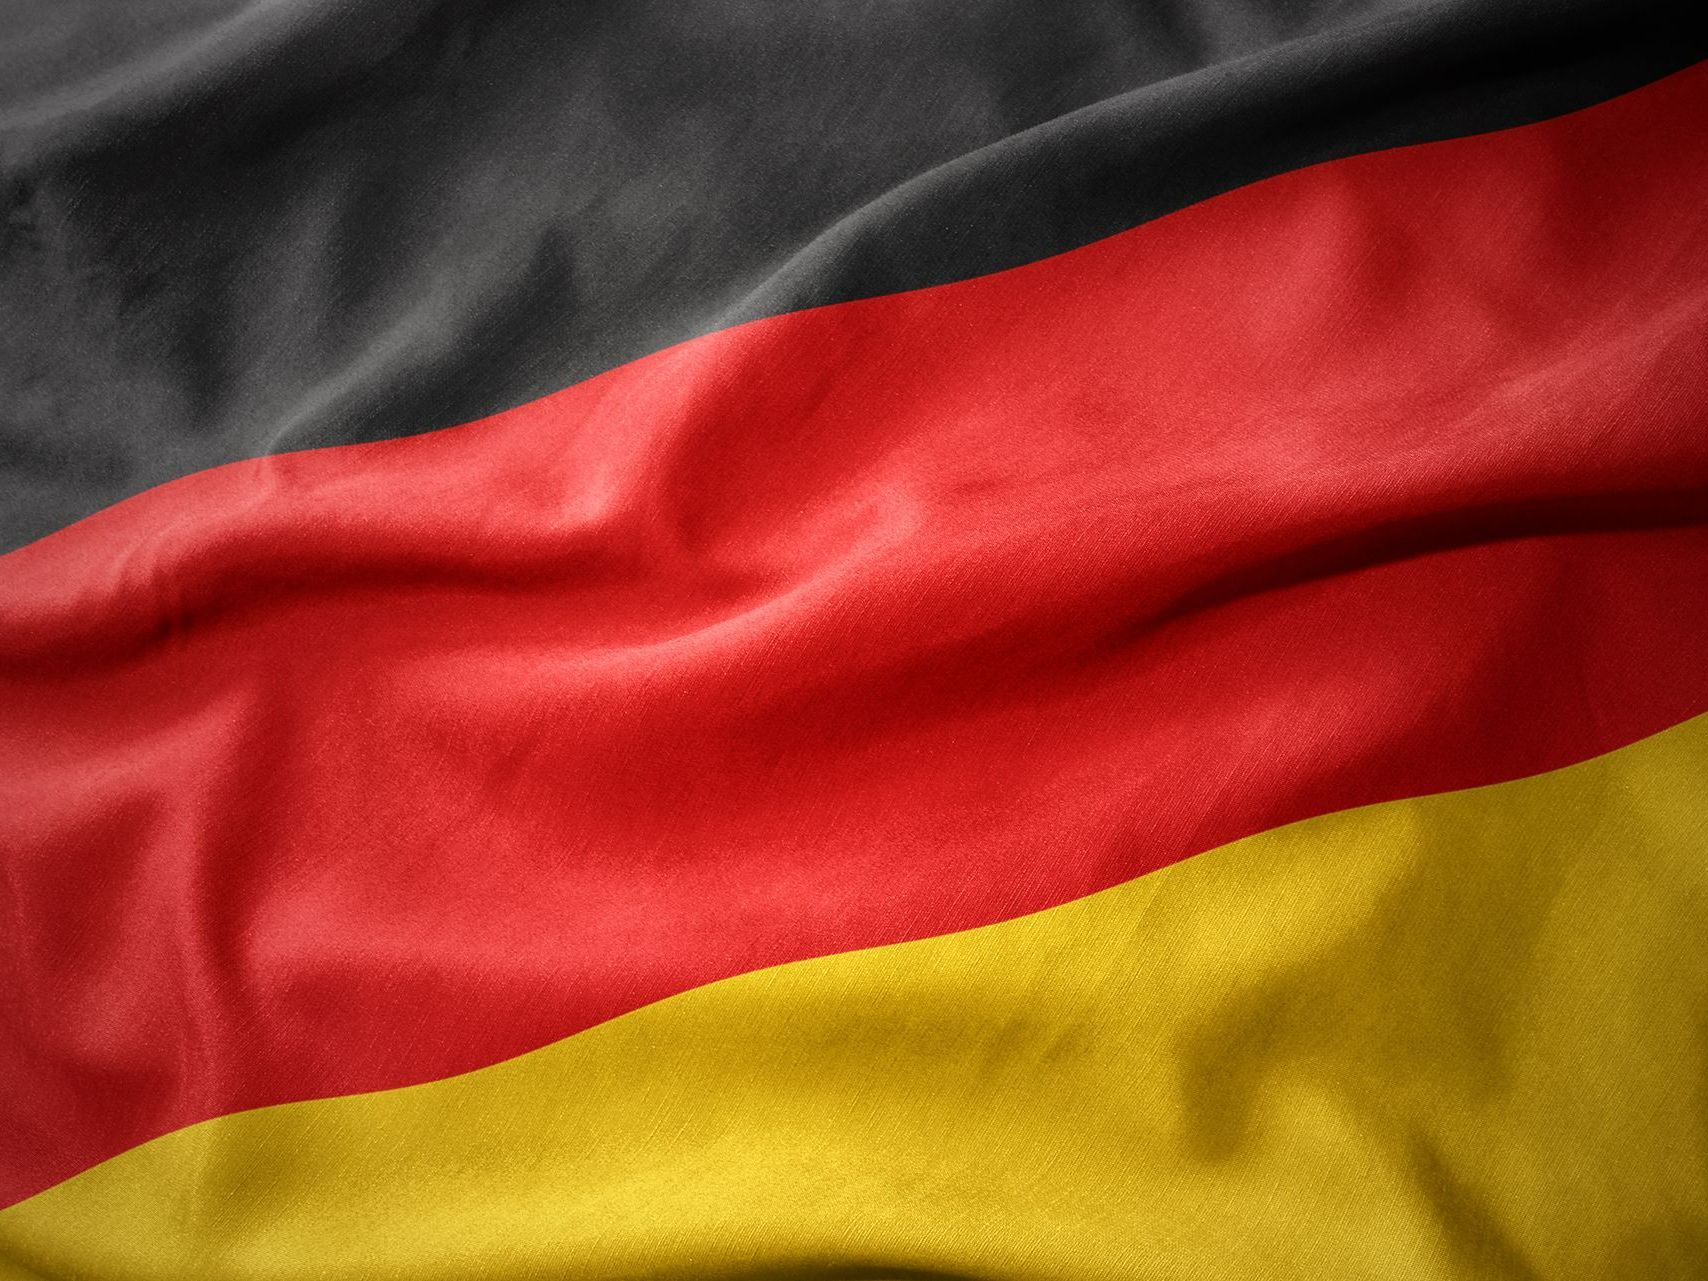 The flag of Germany